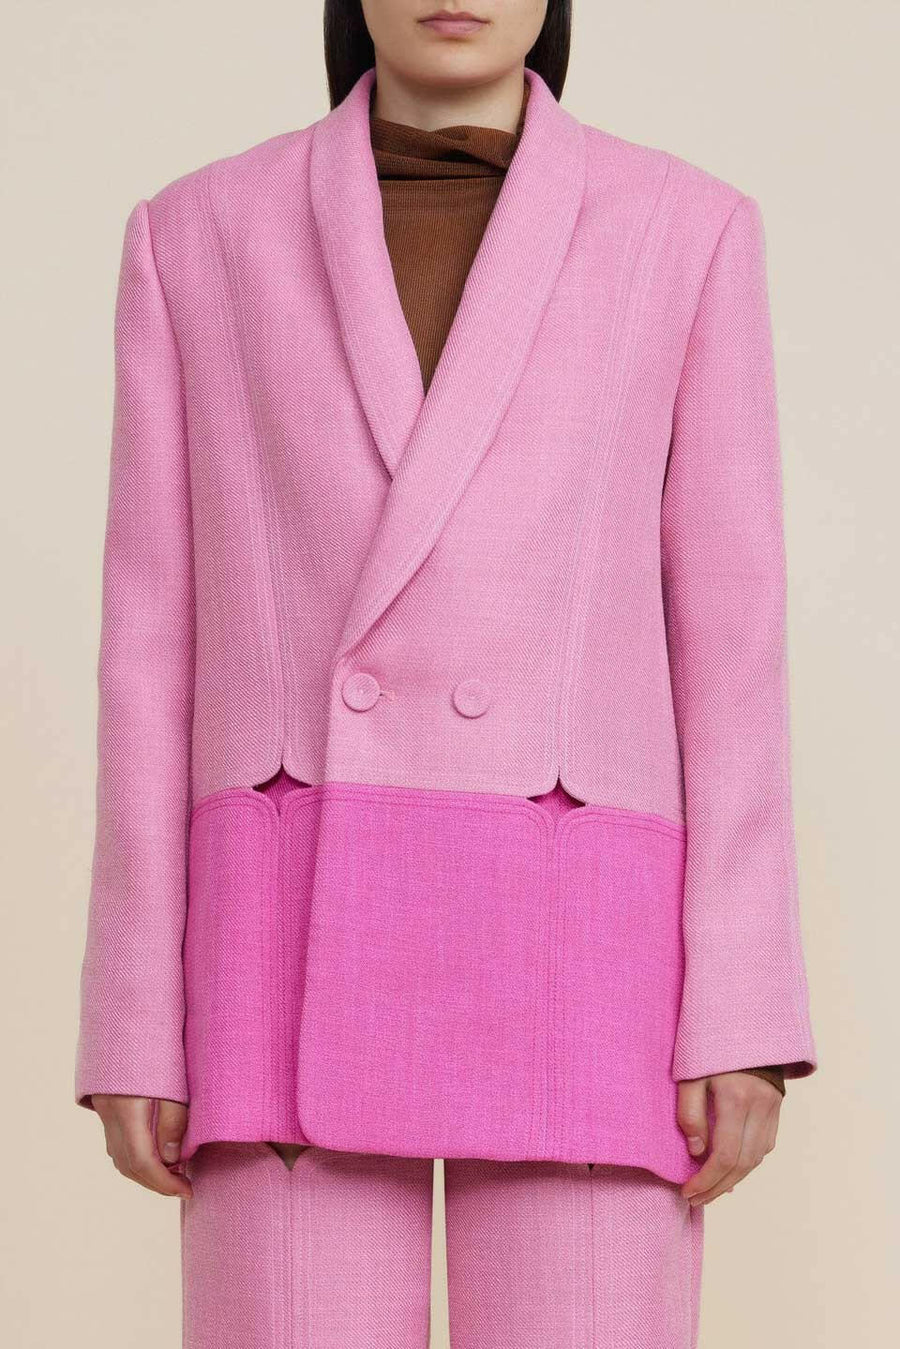 acler ashmore jacket pink figure front